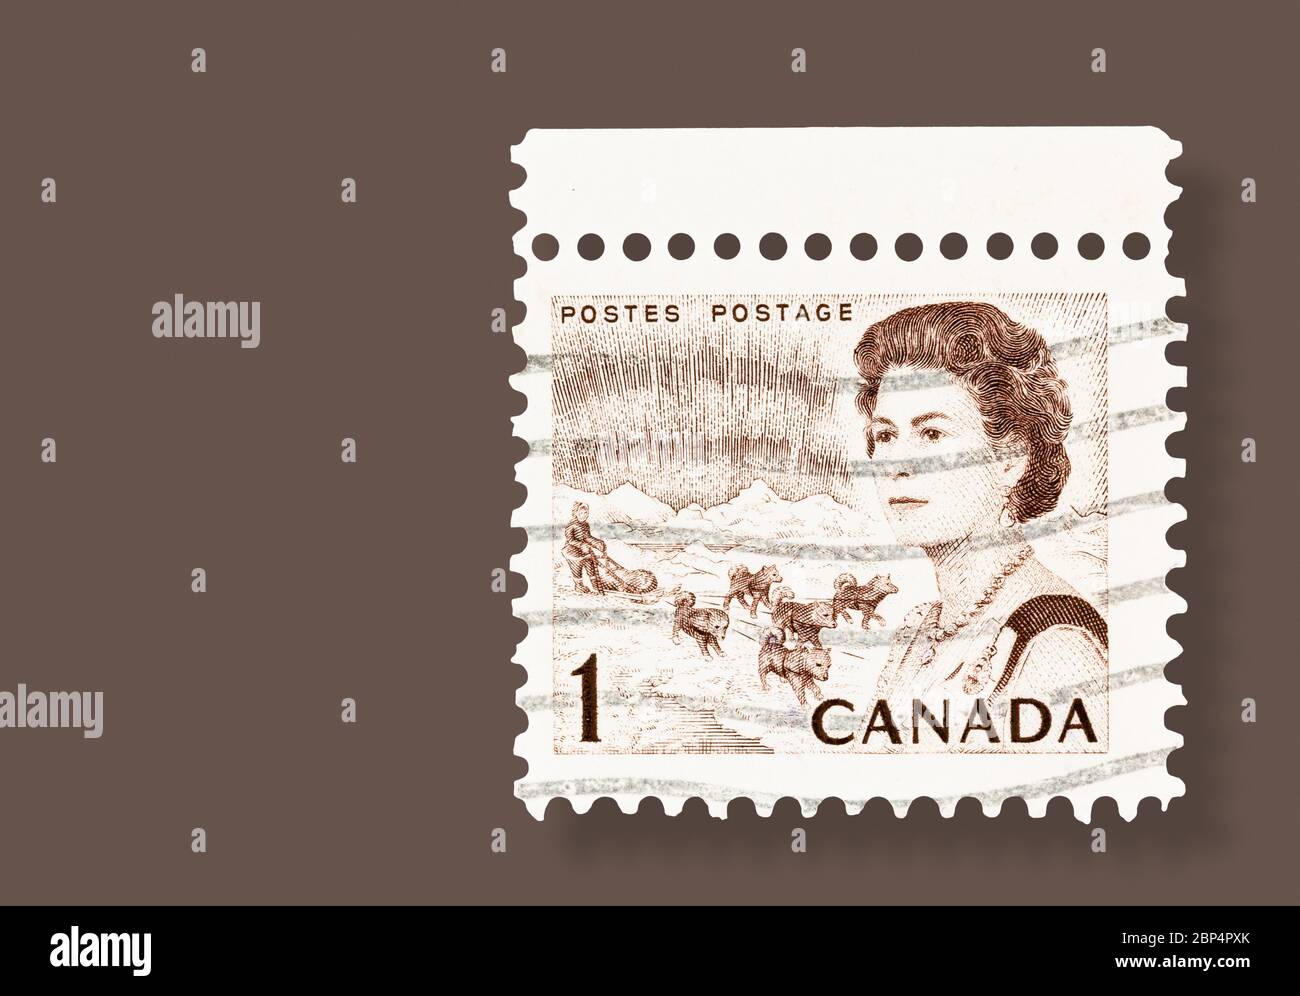 SEATTLE WASHINGTON - May 16, 2020: 1967 Queen Elizabeth defnitive stamp featuring dogs and sled and the Northern Lights on brown background with drop Stock Photo